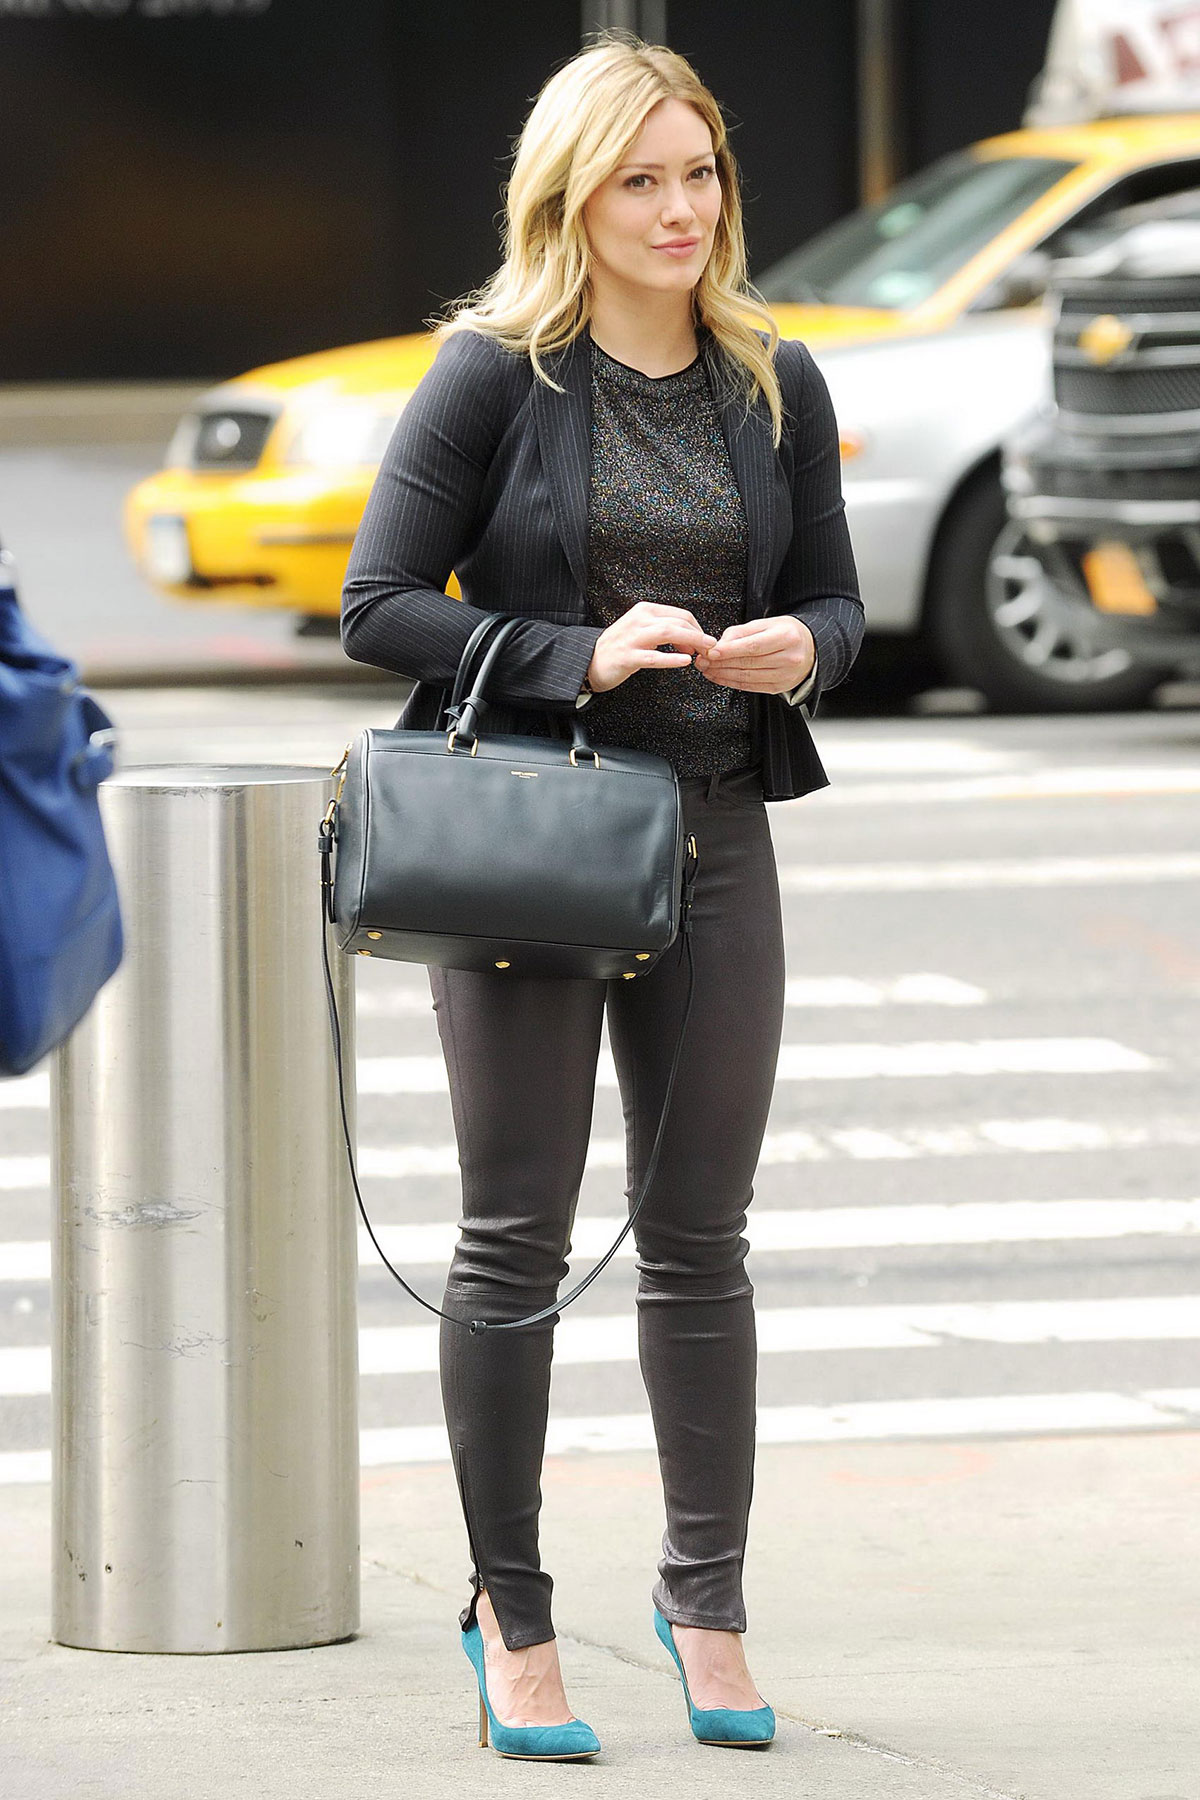 Hilary Duff was spotted on the set of Younger in New York City